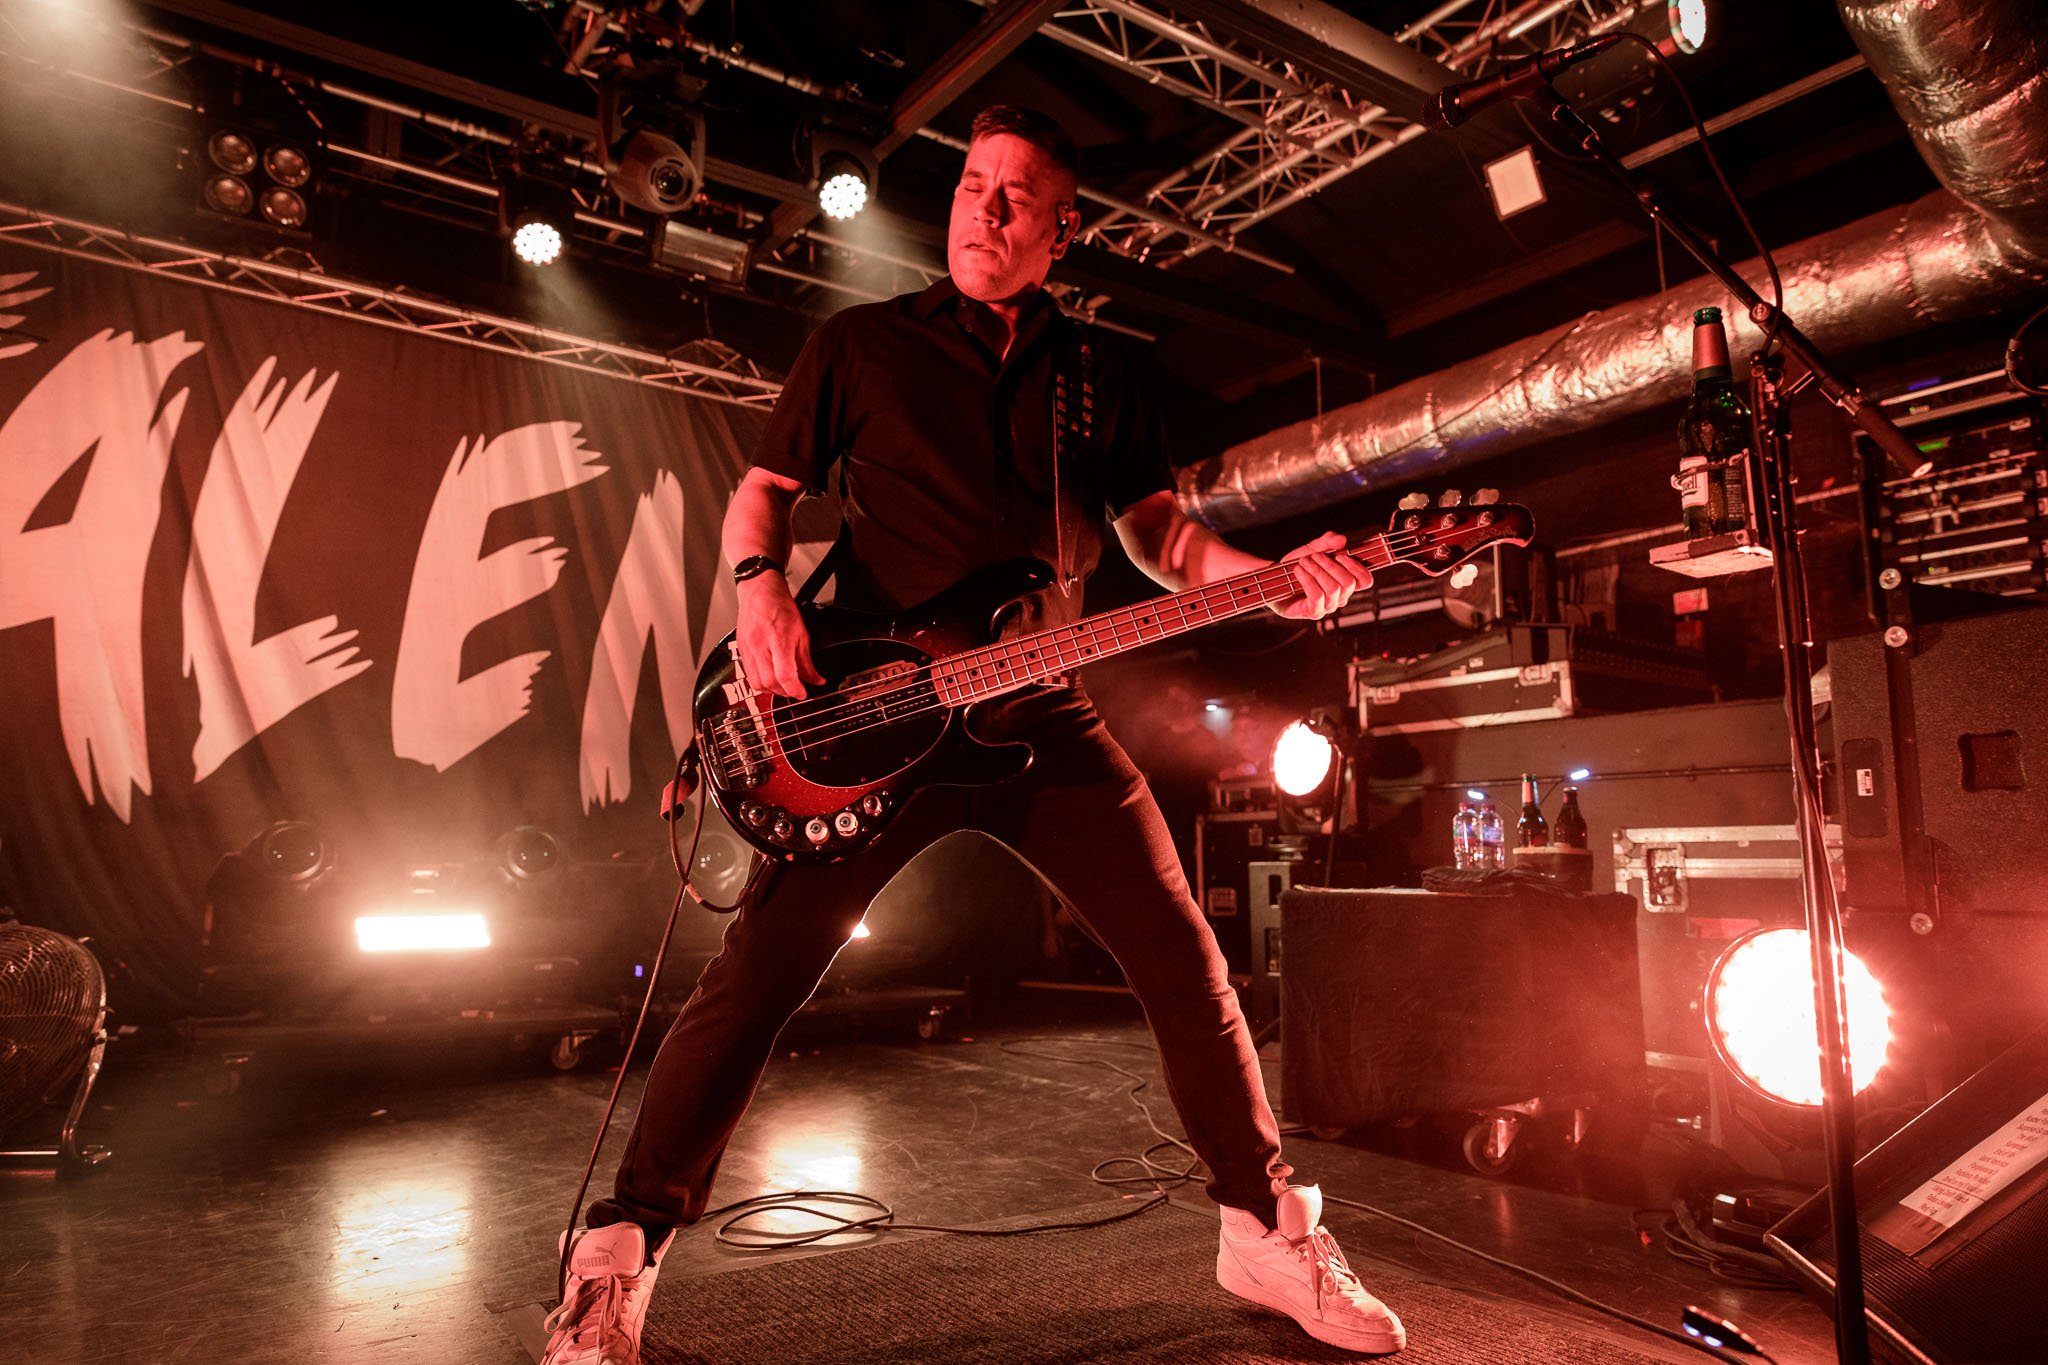 Billy Talent at the O2 Academy in Liverpool on June 16th 2022 ©